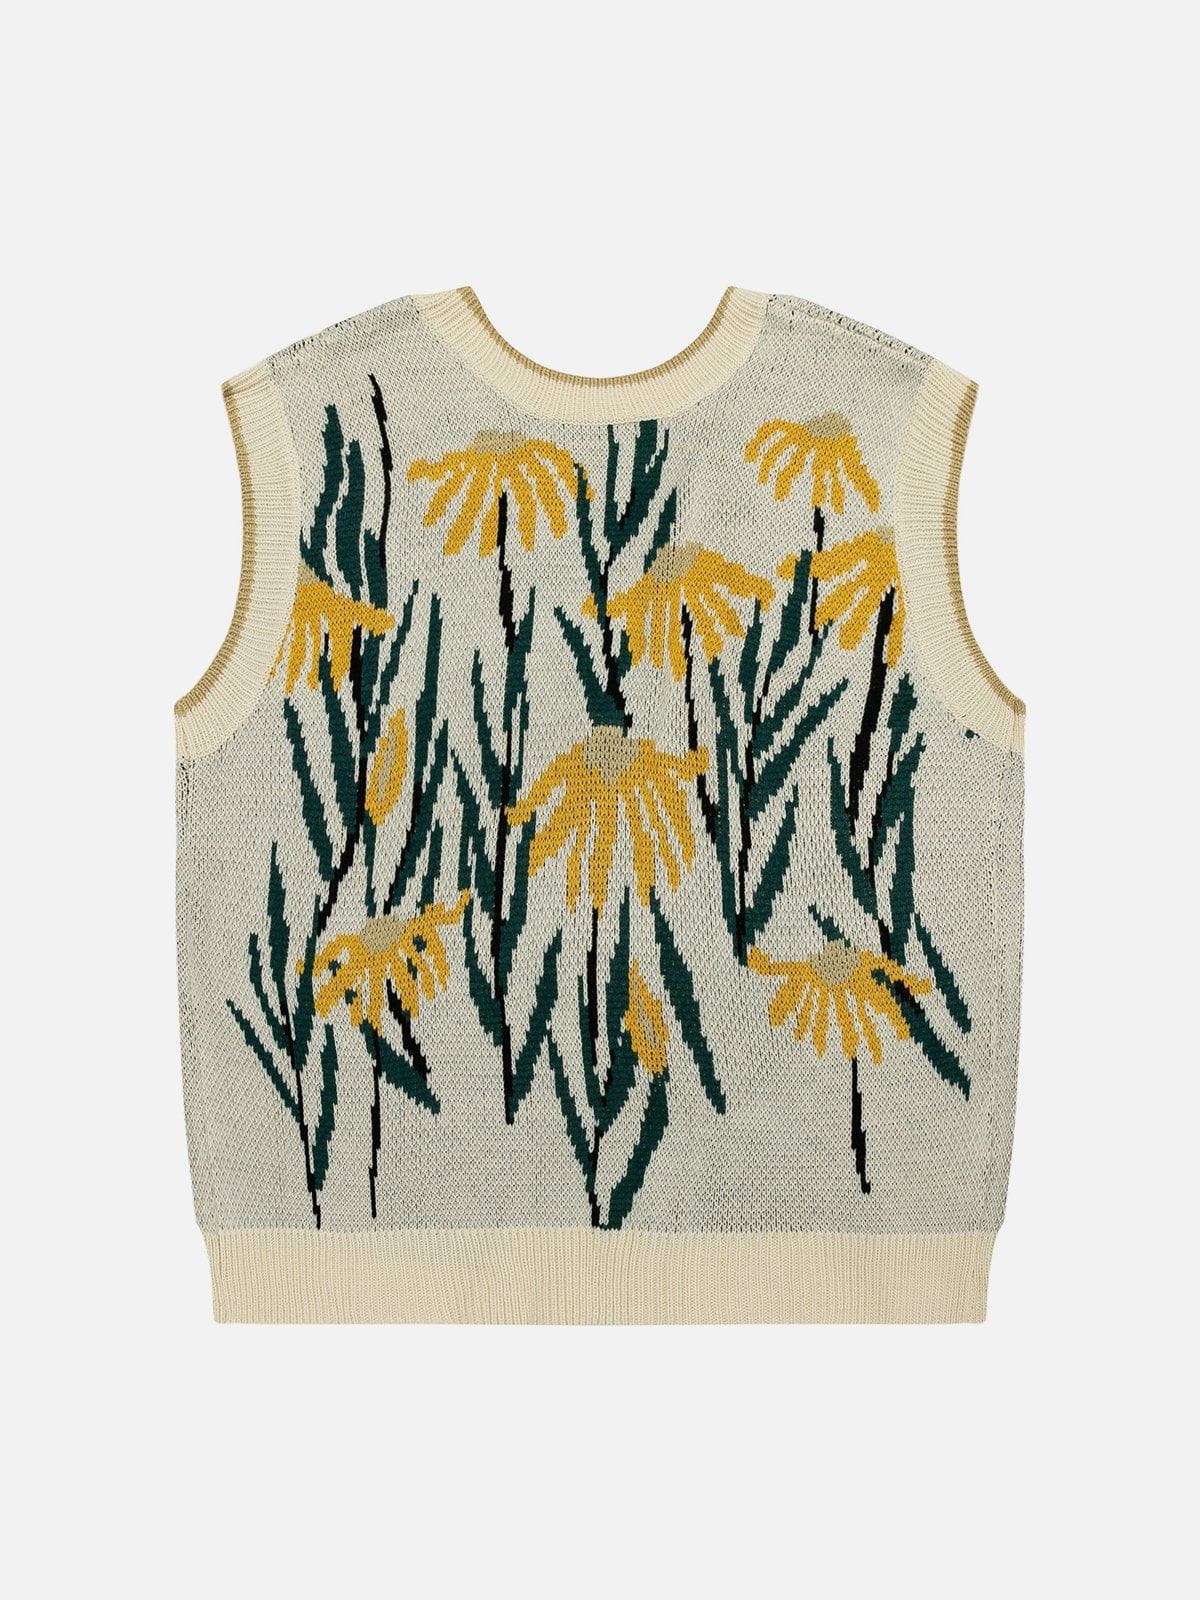 Daisies Lace Up Design Sweater Vest Streetwear Brand Techwear Combat Tactical YUGEN THEORY